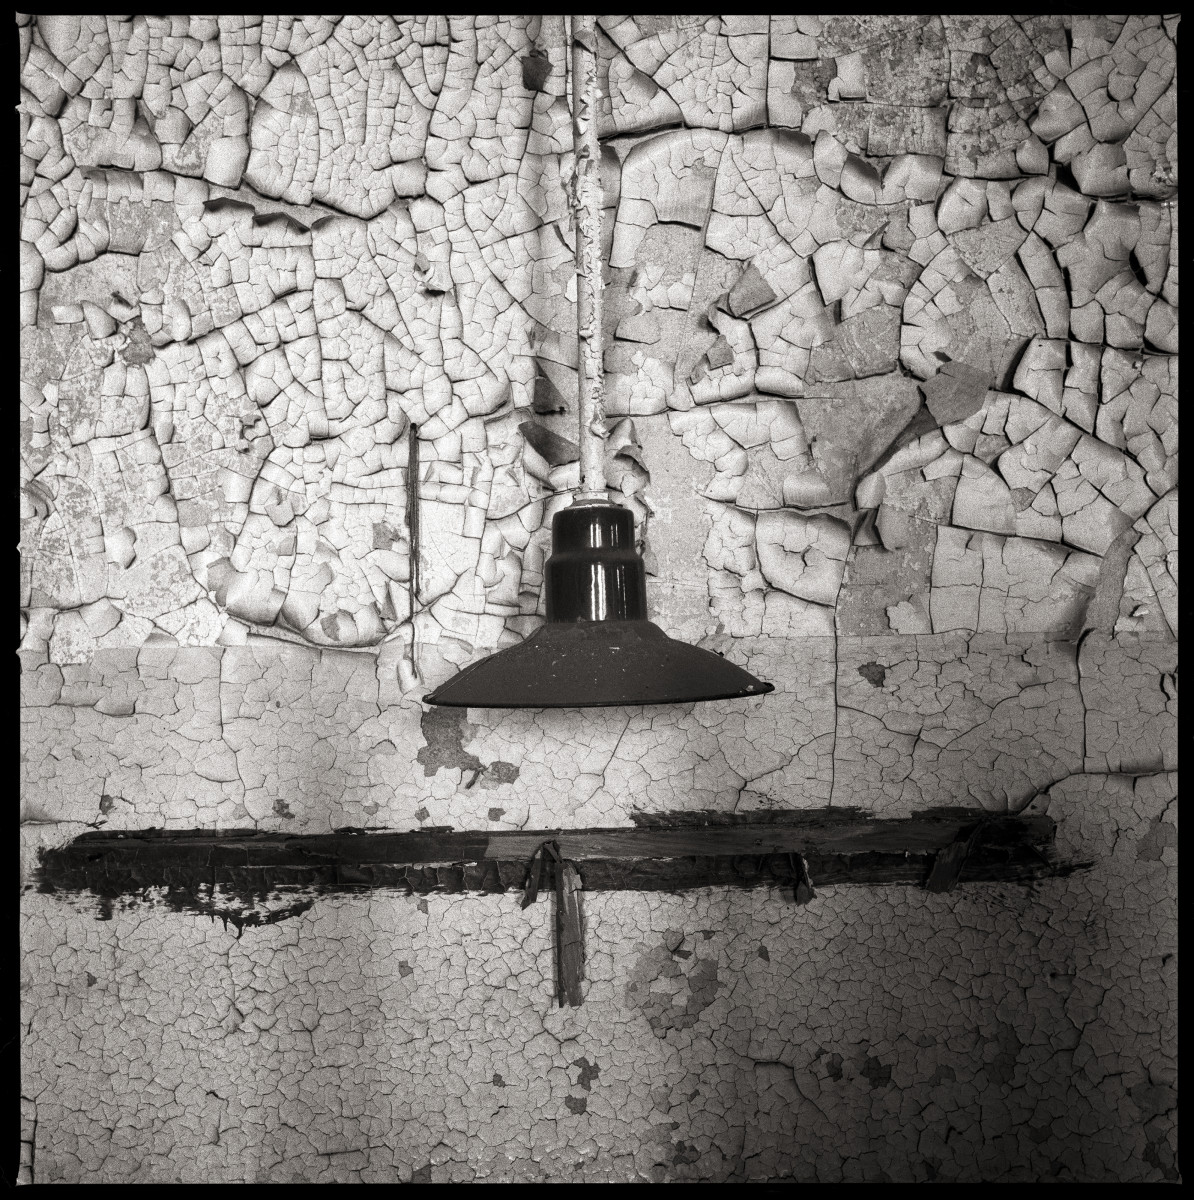 Kitchen by Eric T. Kunsman  Image: ID: A black and white image shows a close up of a hanging light fixture next to a wall. The fixture has a circular bottom and it attached to a pole from the ceiling.  The wall has cracking paint and cement.